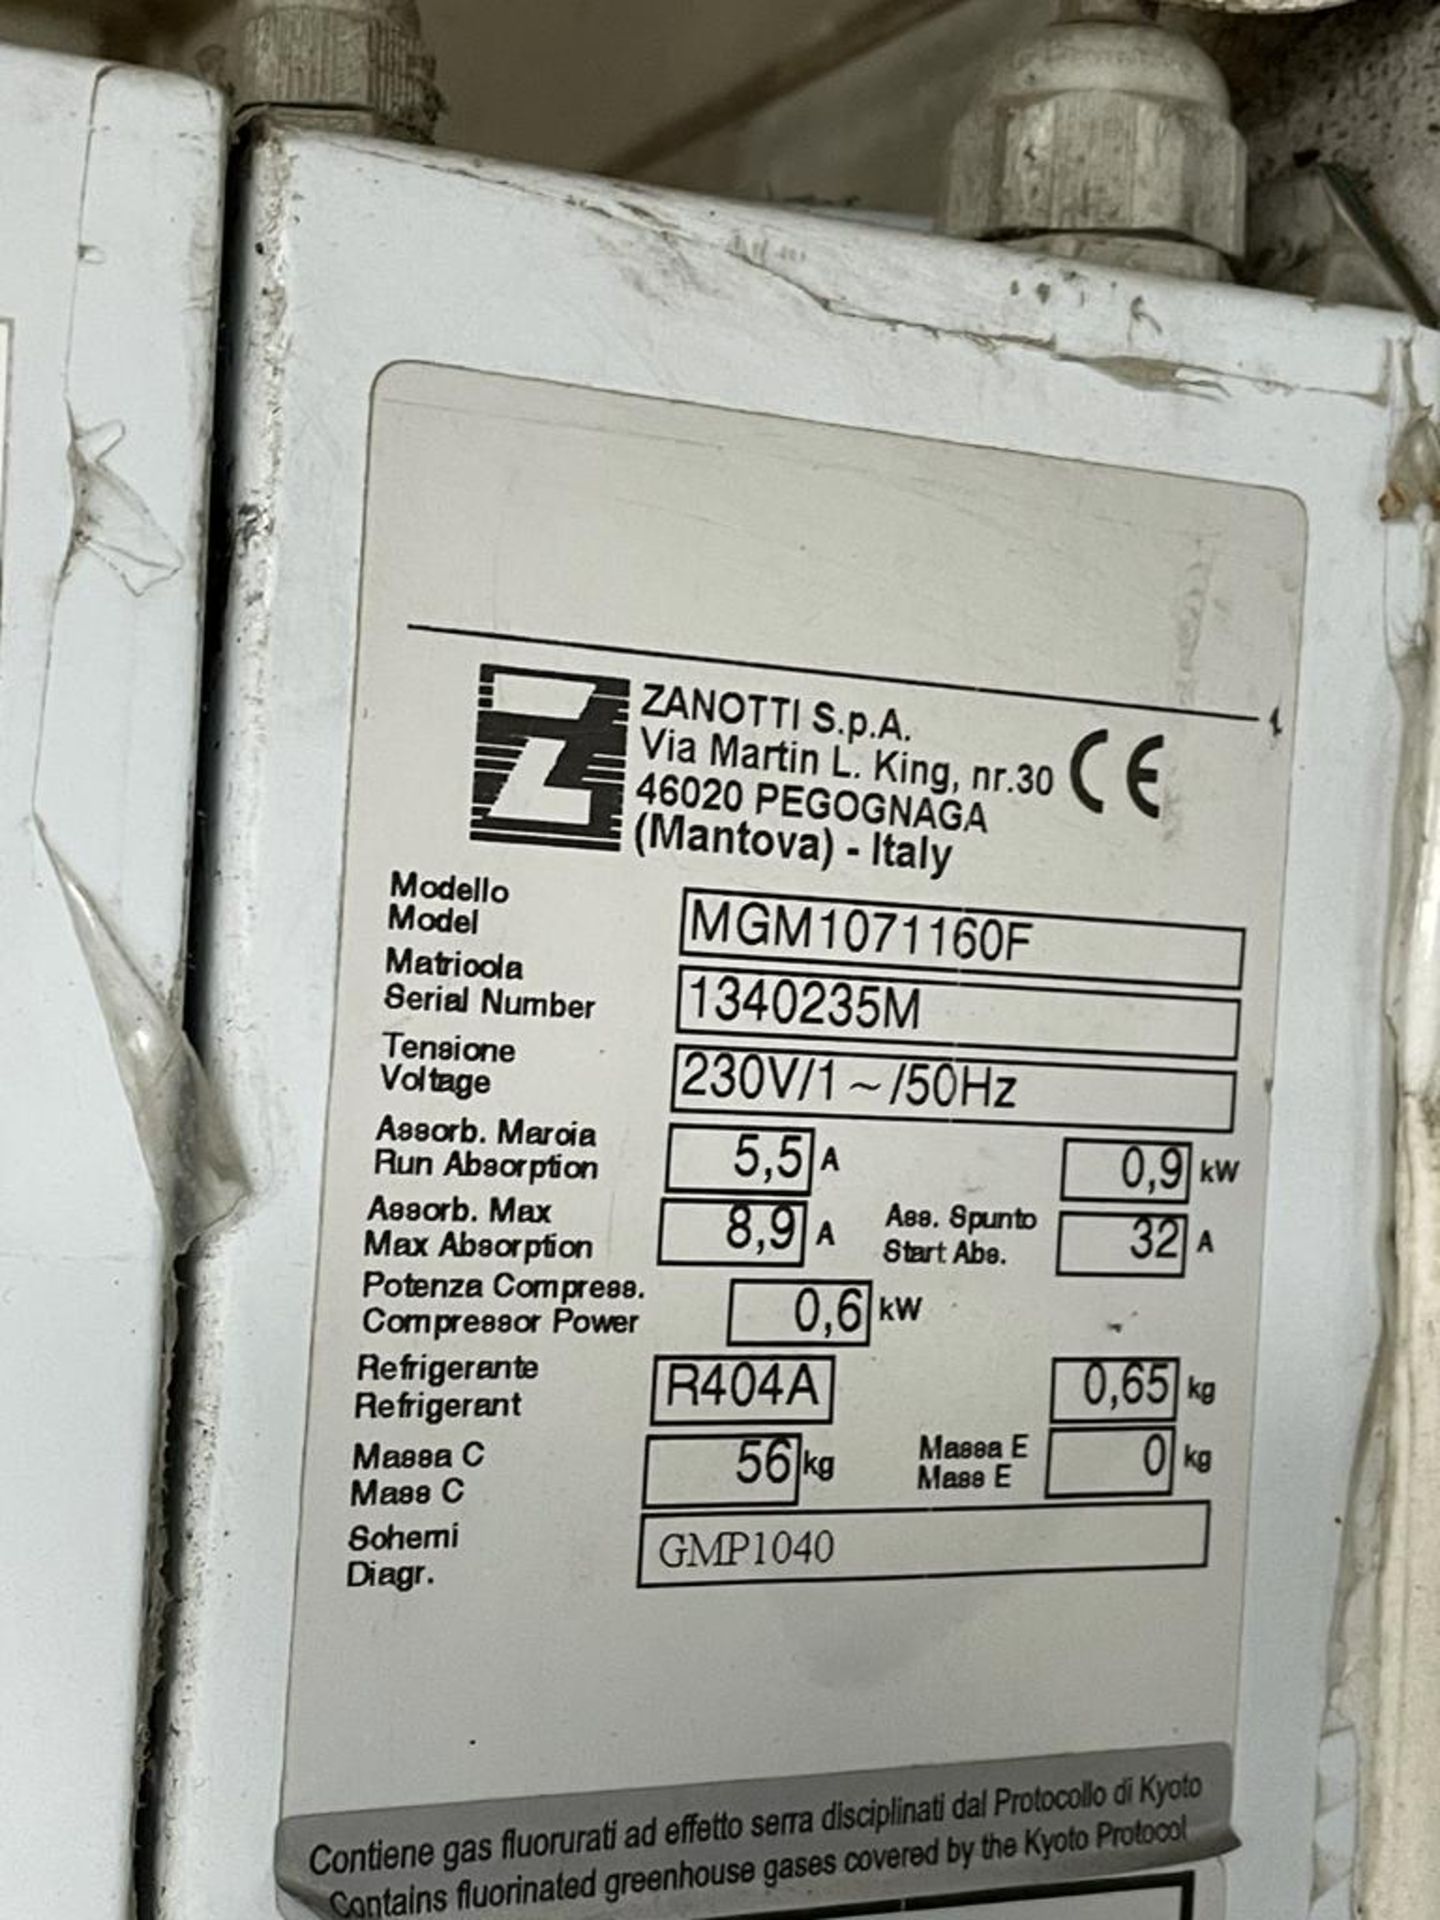 1 x Walk In Refrigerated Cold and Freezer With Zanotti Control Units - Ref: BK249 - CL686 - - Image 17 of 24